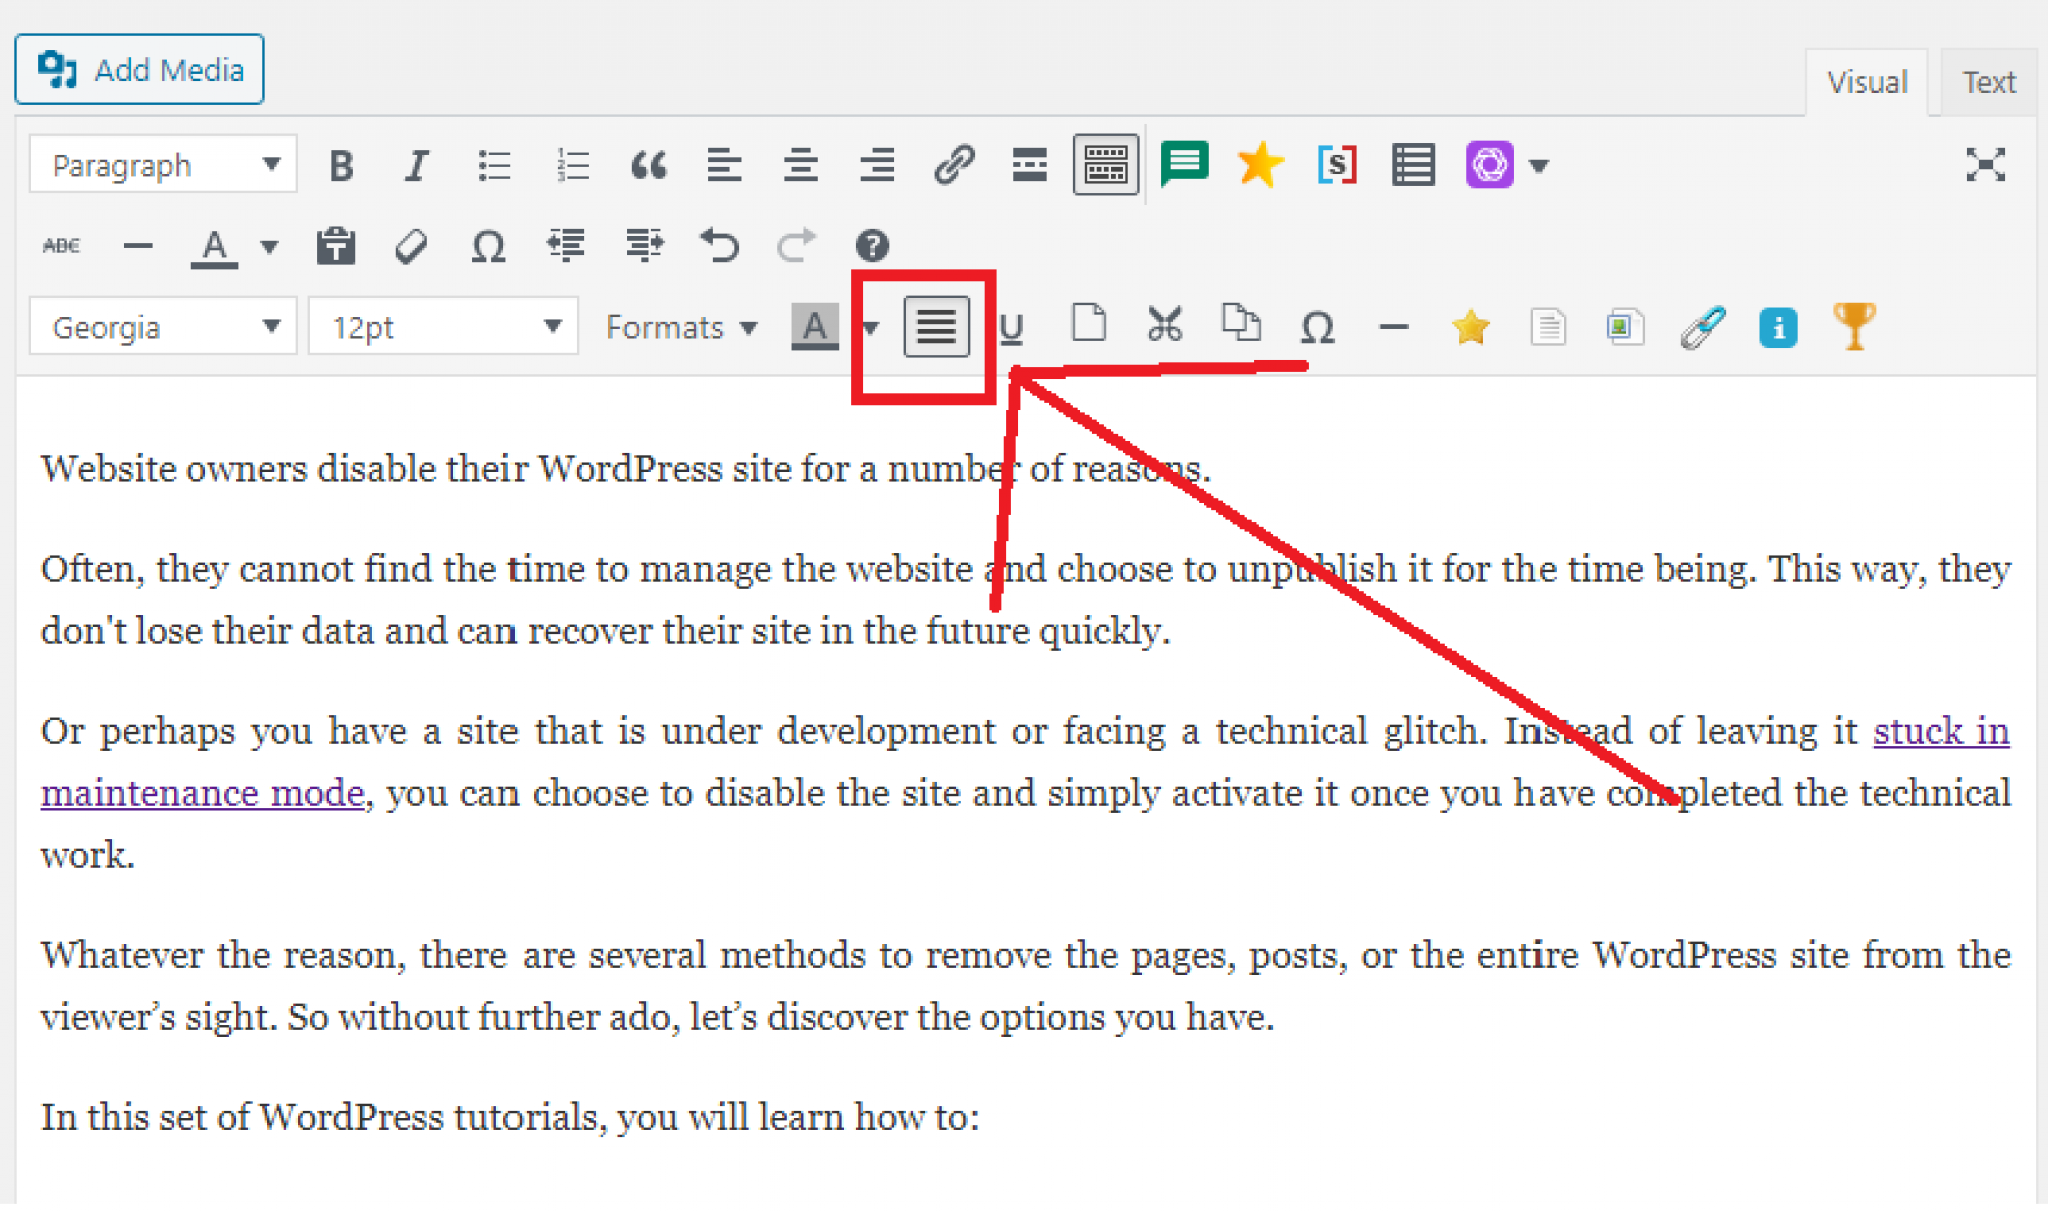 How to Justify Text in WordPress (with or without Plugins)